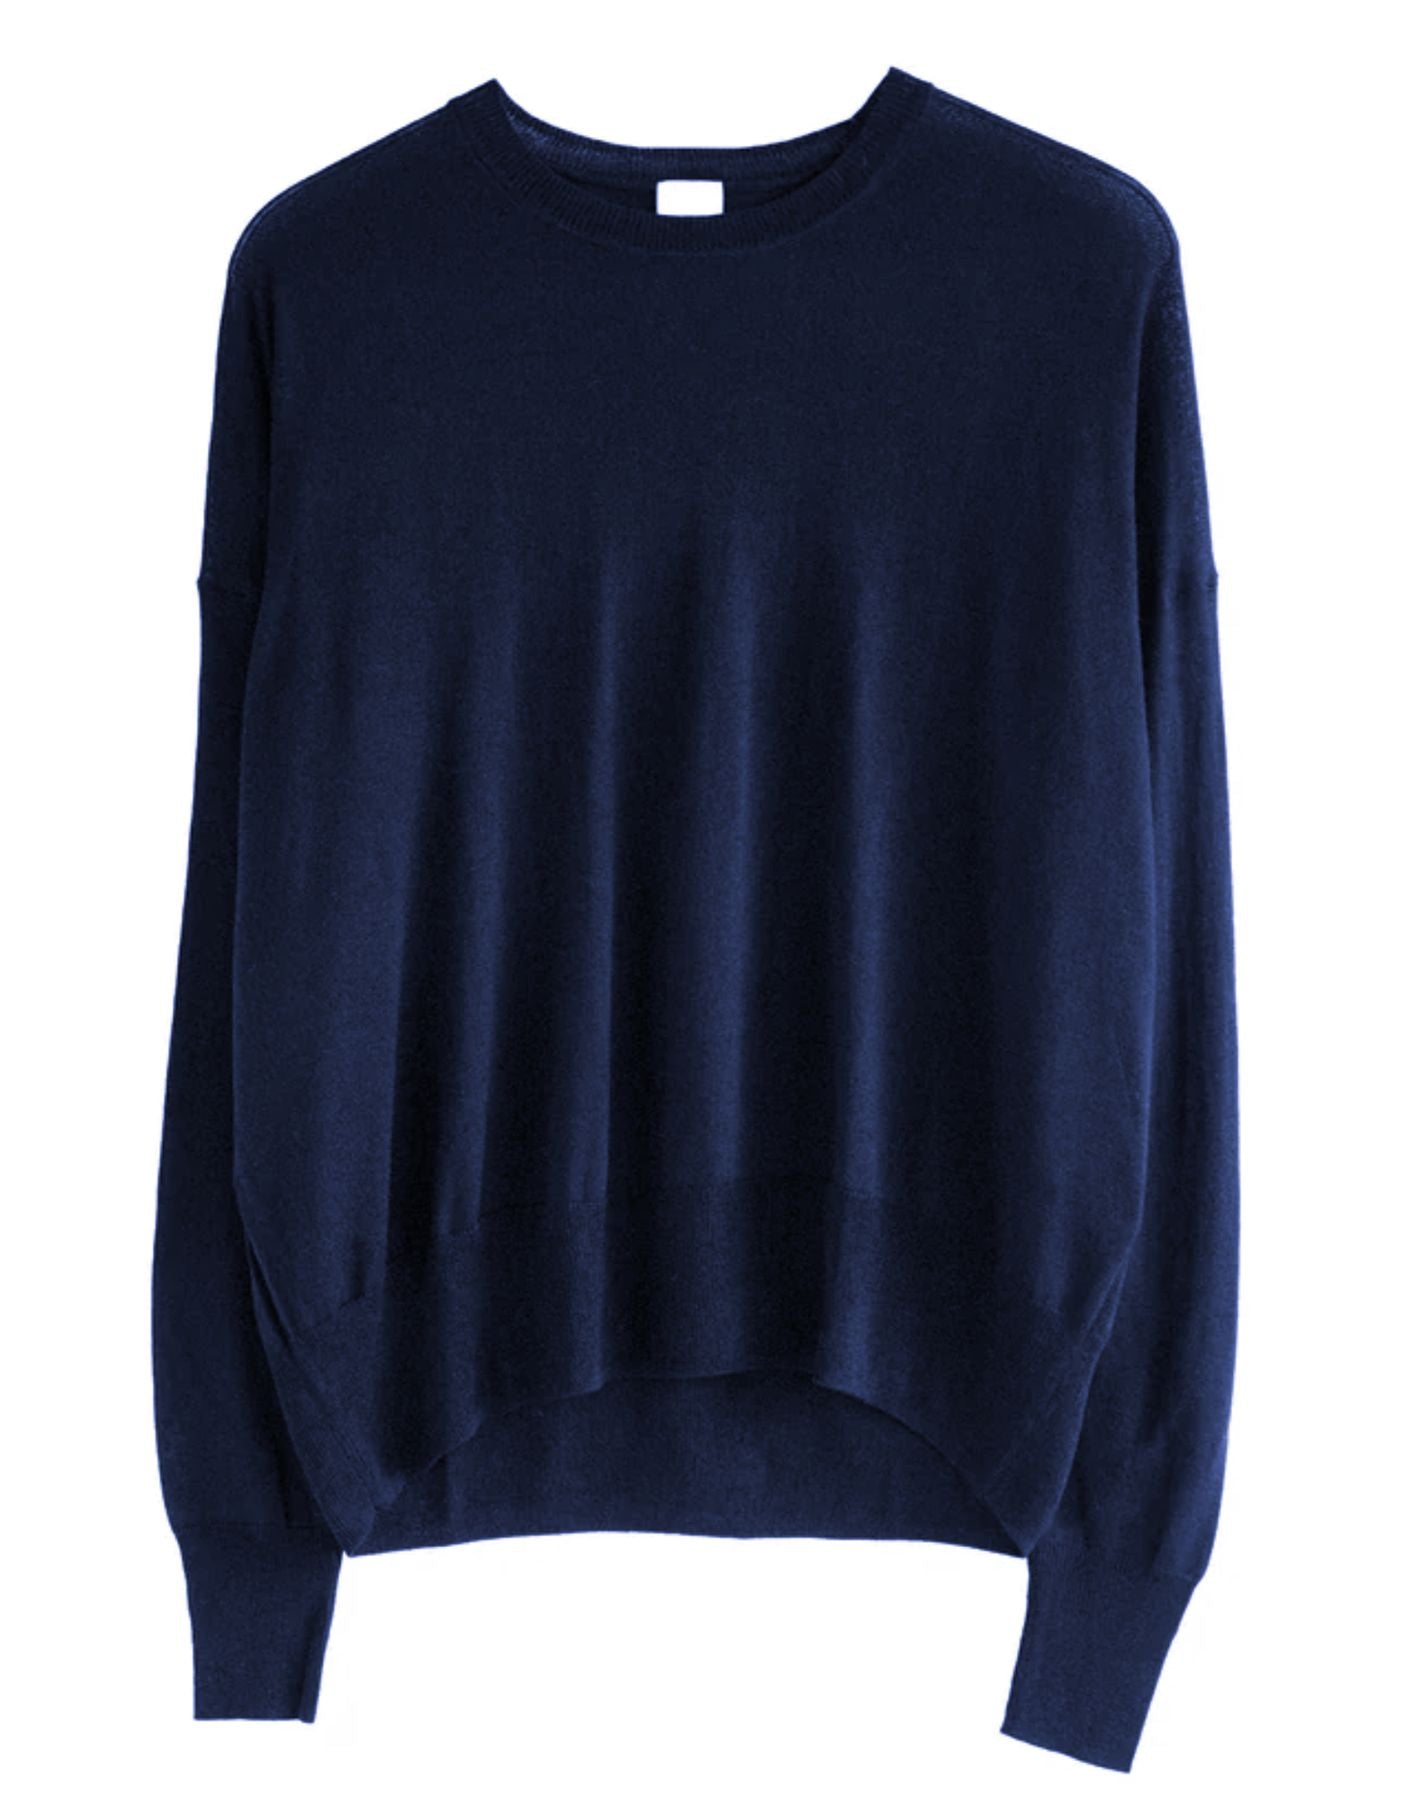 Sweater for woman CT24116 BLACK NAVY C.T. plage